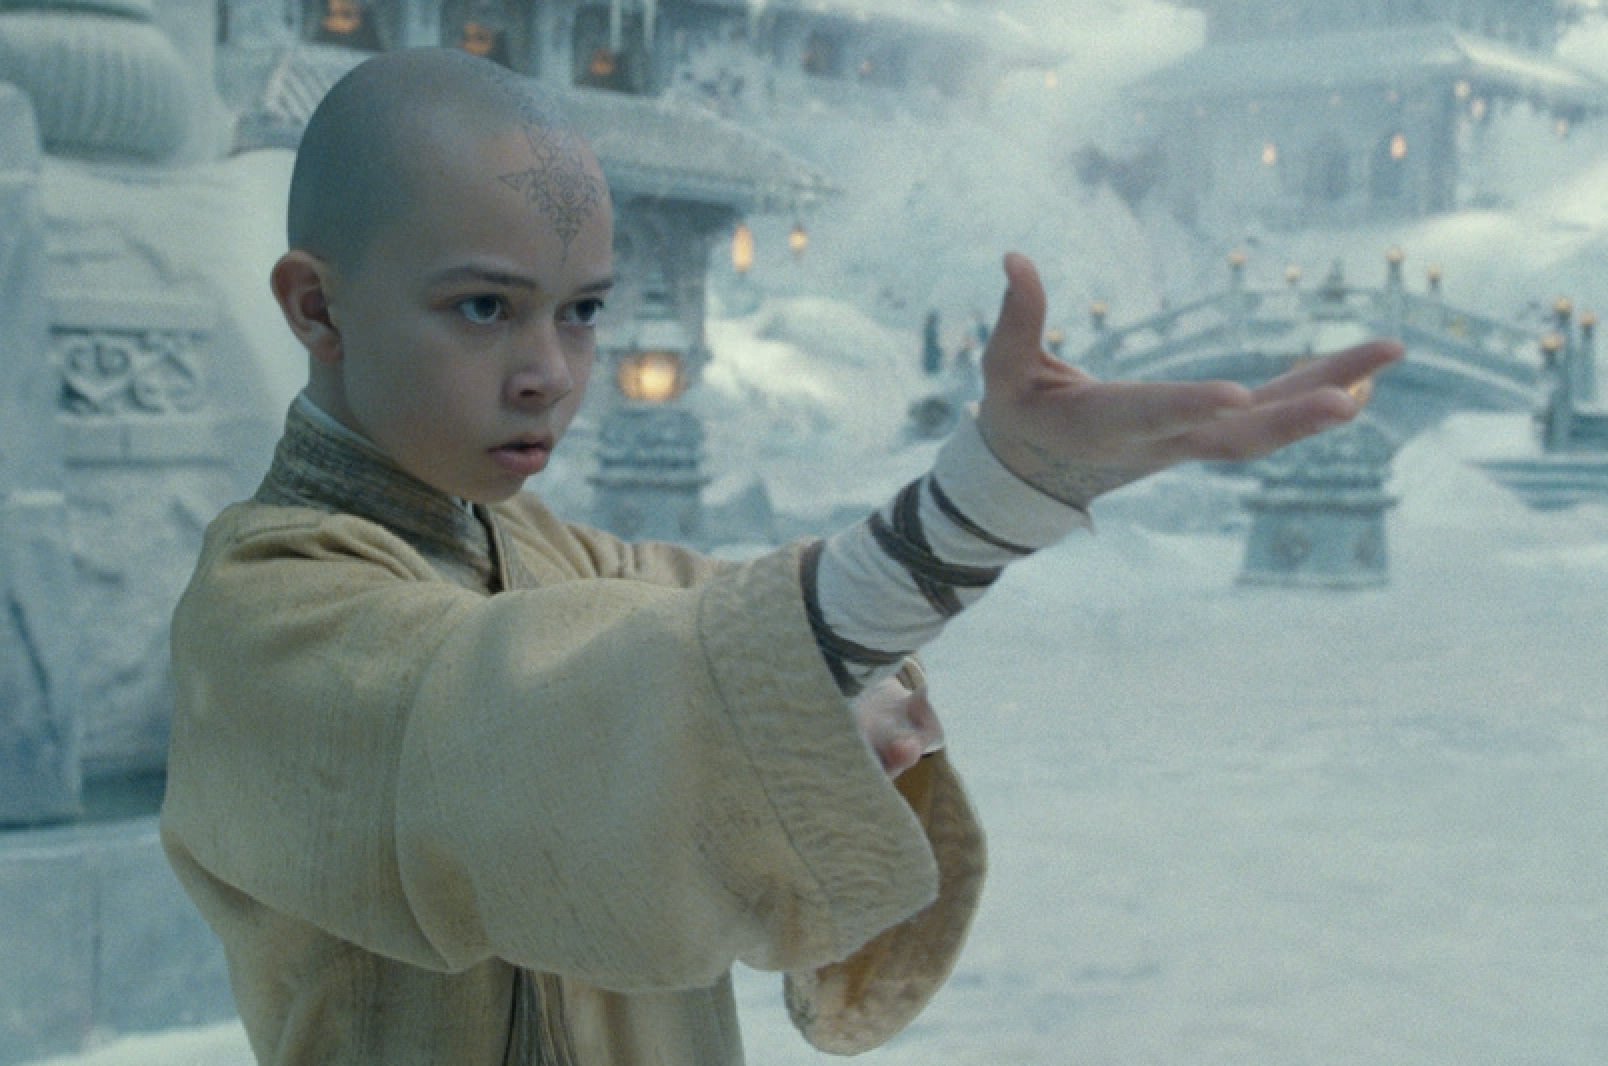 Aang from Avatar: The Last Airbender in a martial arts stance